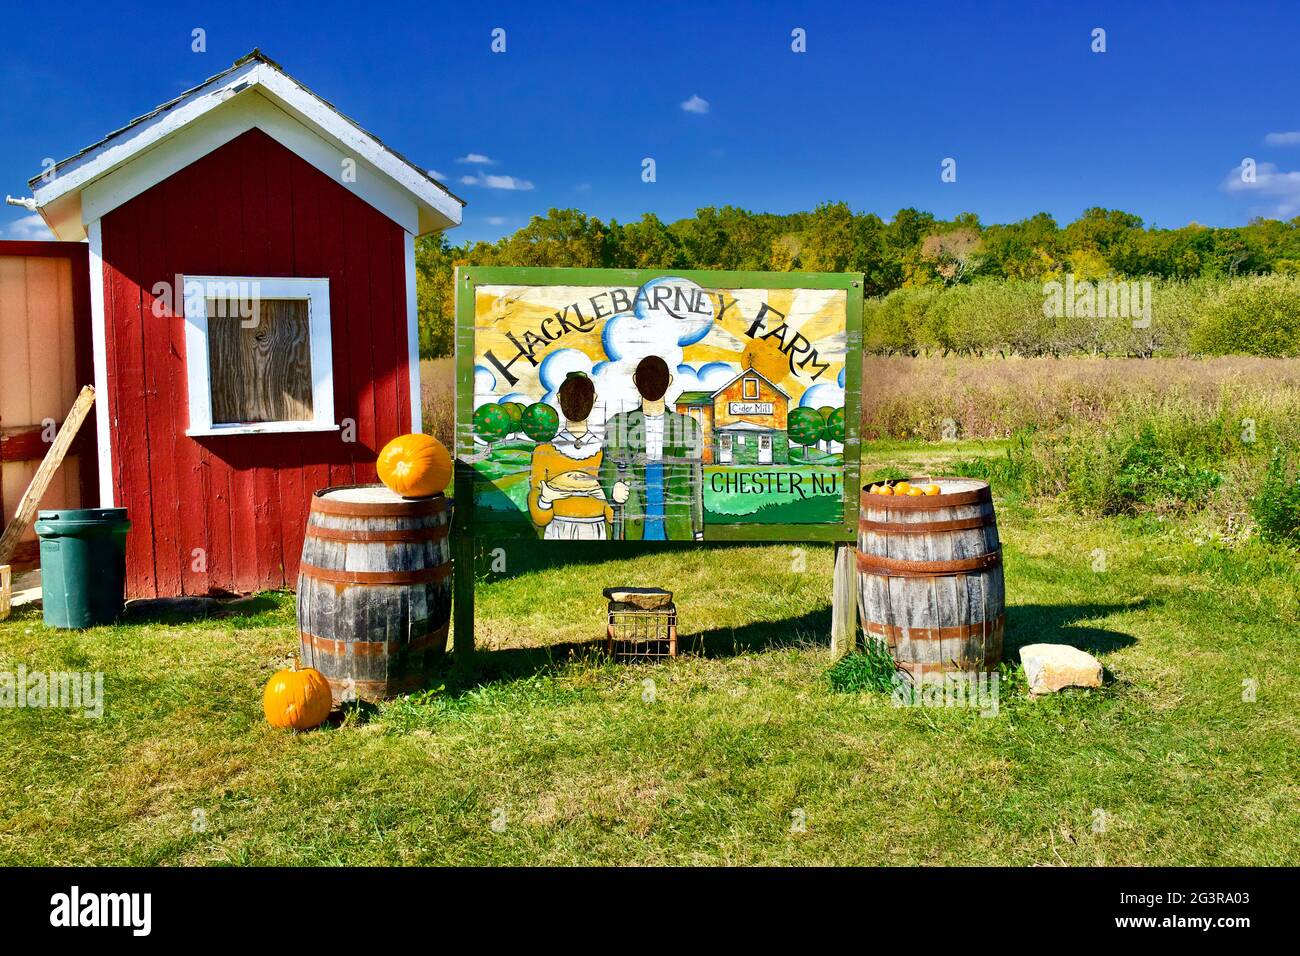 A photo stand-in board for two people to make you look like American Gothic farmers.Hacklebarney Farm, Chester New Jersey, USA.  Seasonal farm Stock Photo